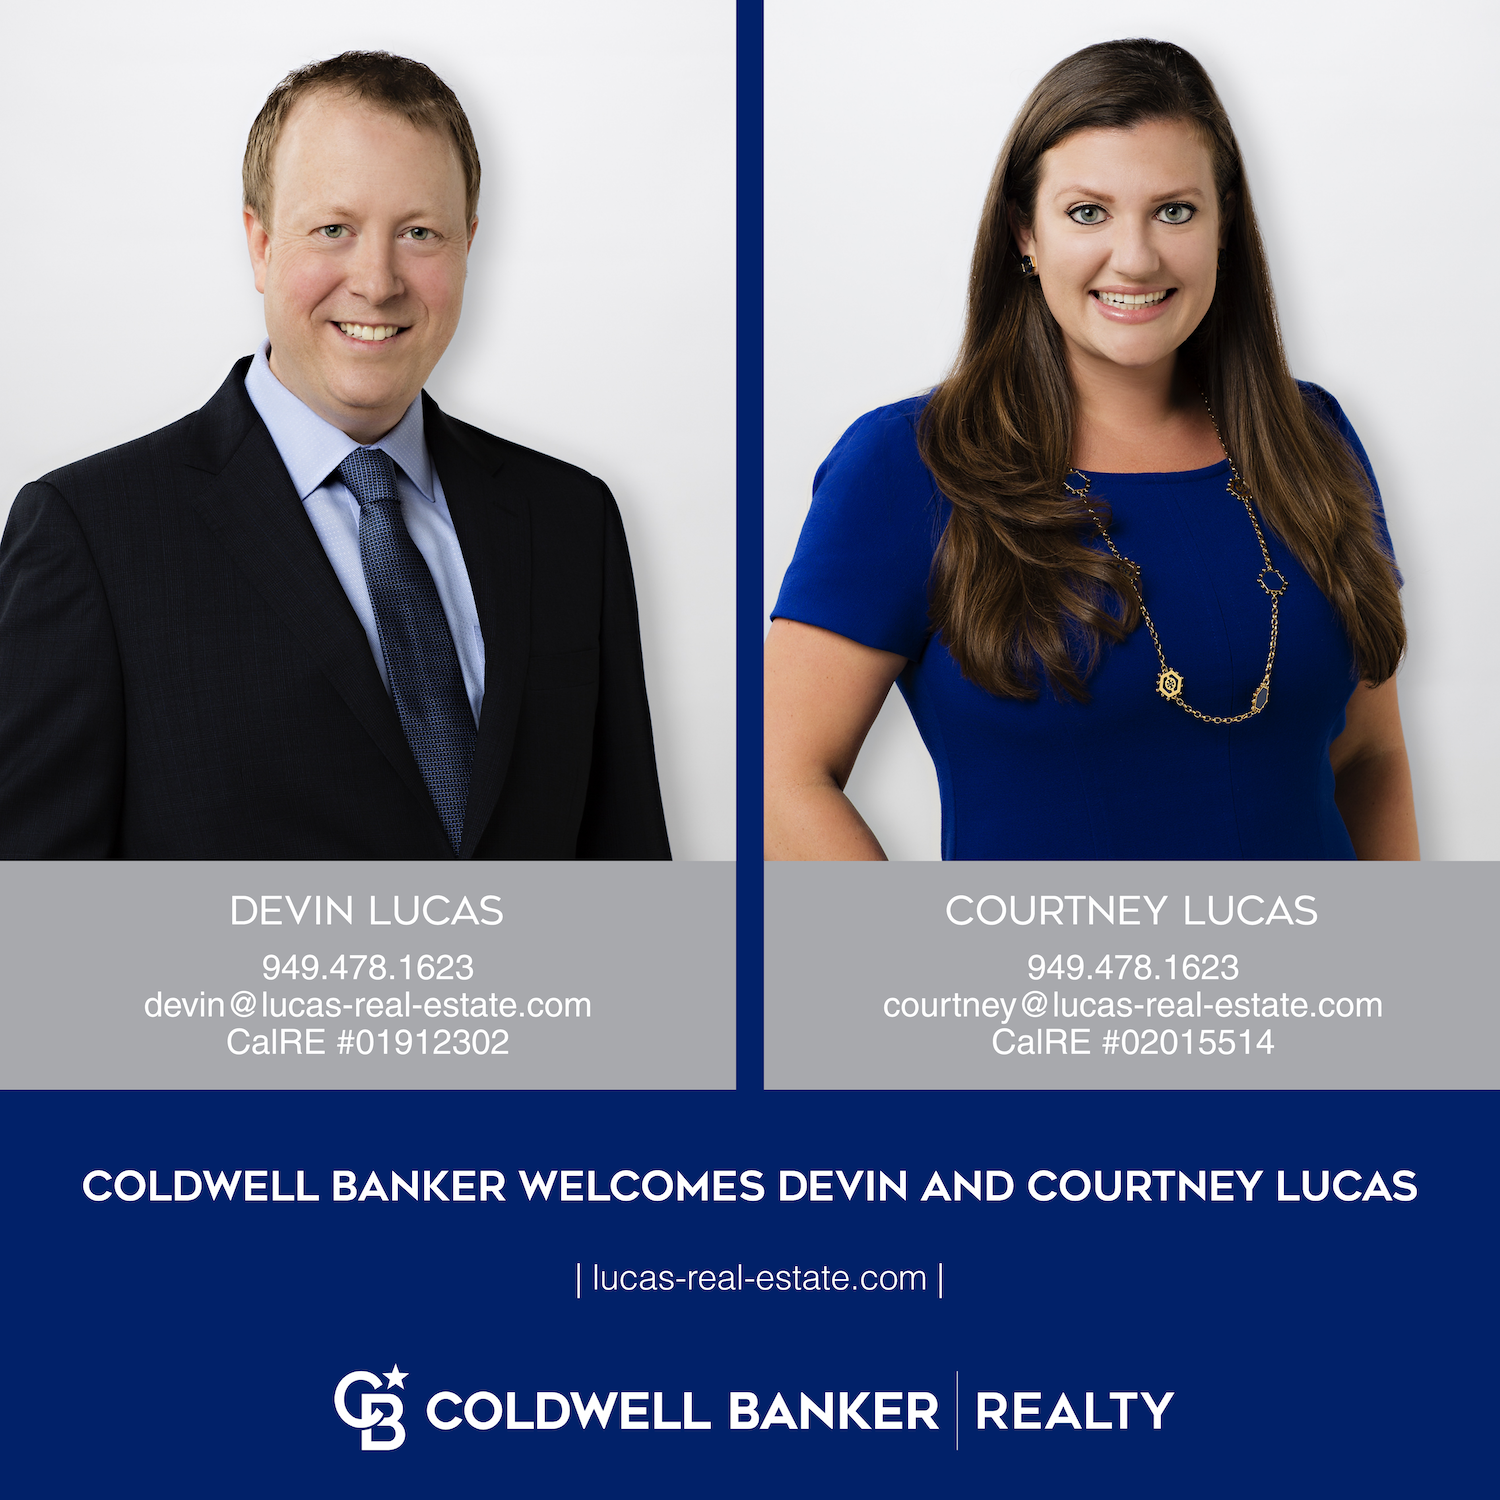 Coldwell Banker Welcomes Devin and Courtney Lucas